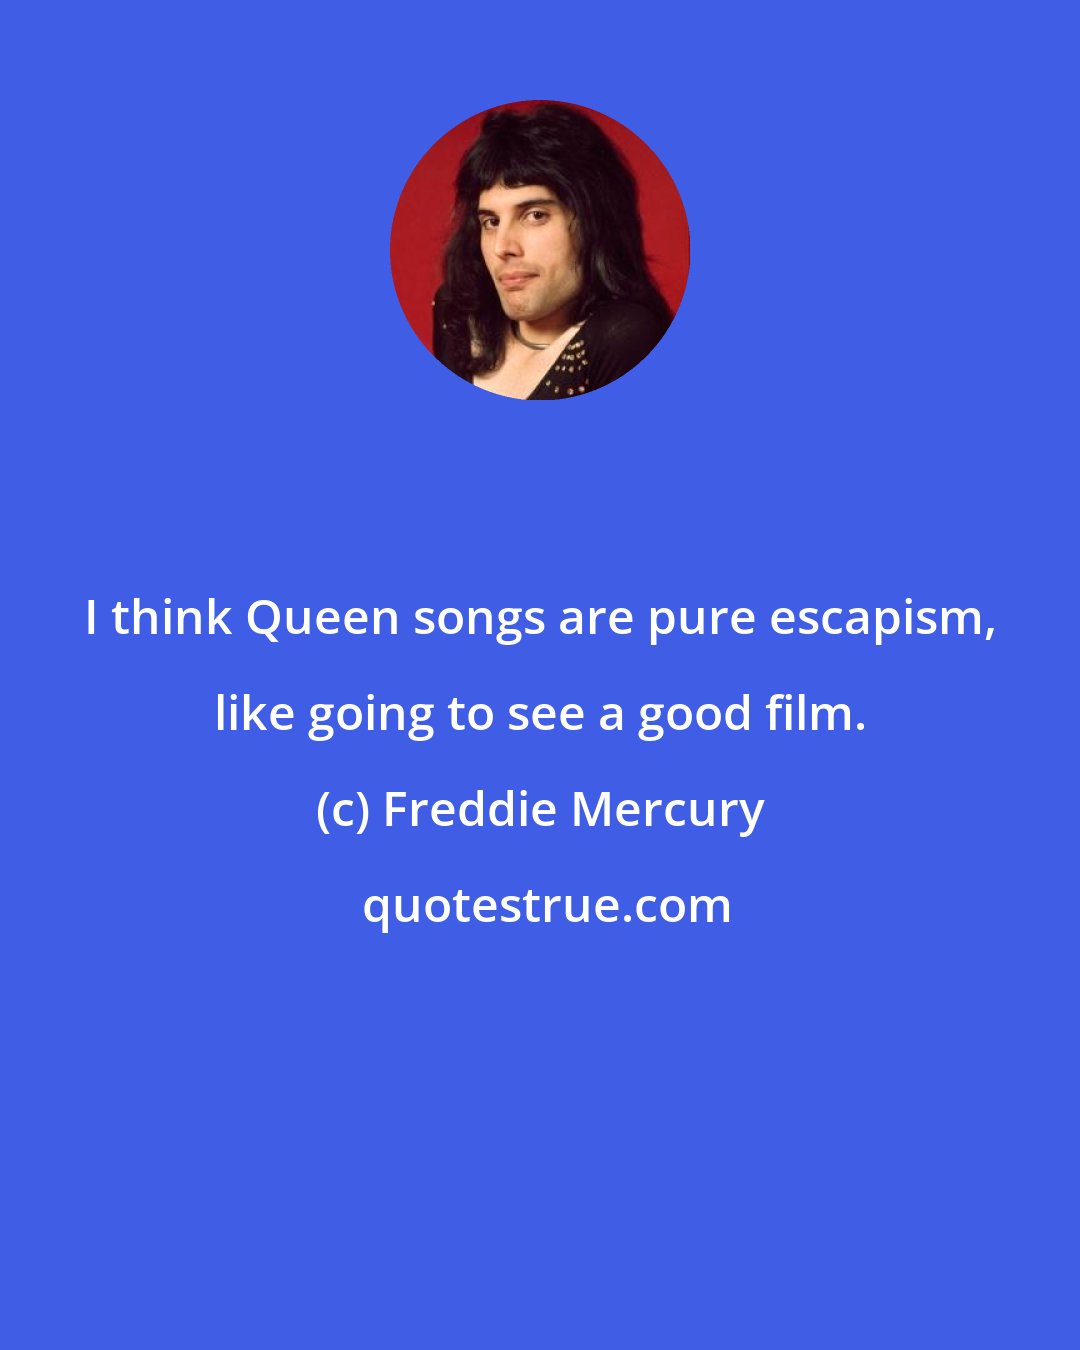 Freddie Mercury: I think Queen songs are pure escapism, like going to see a good film.